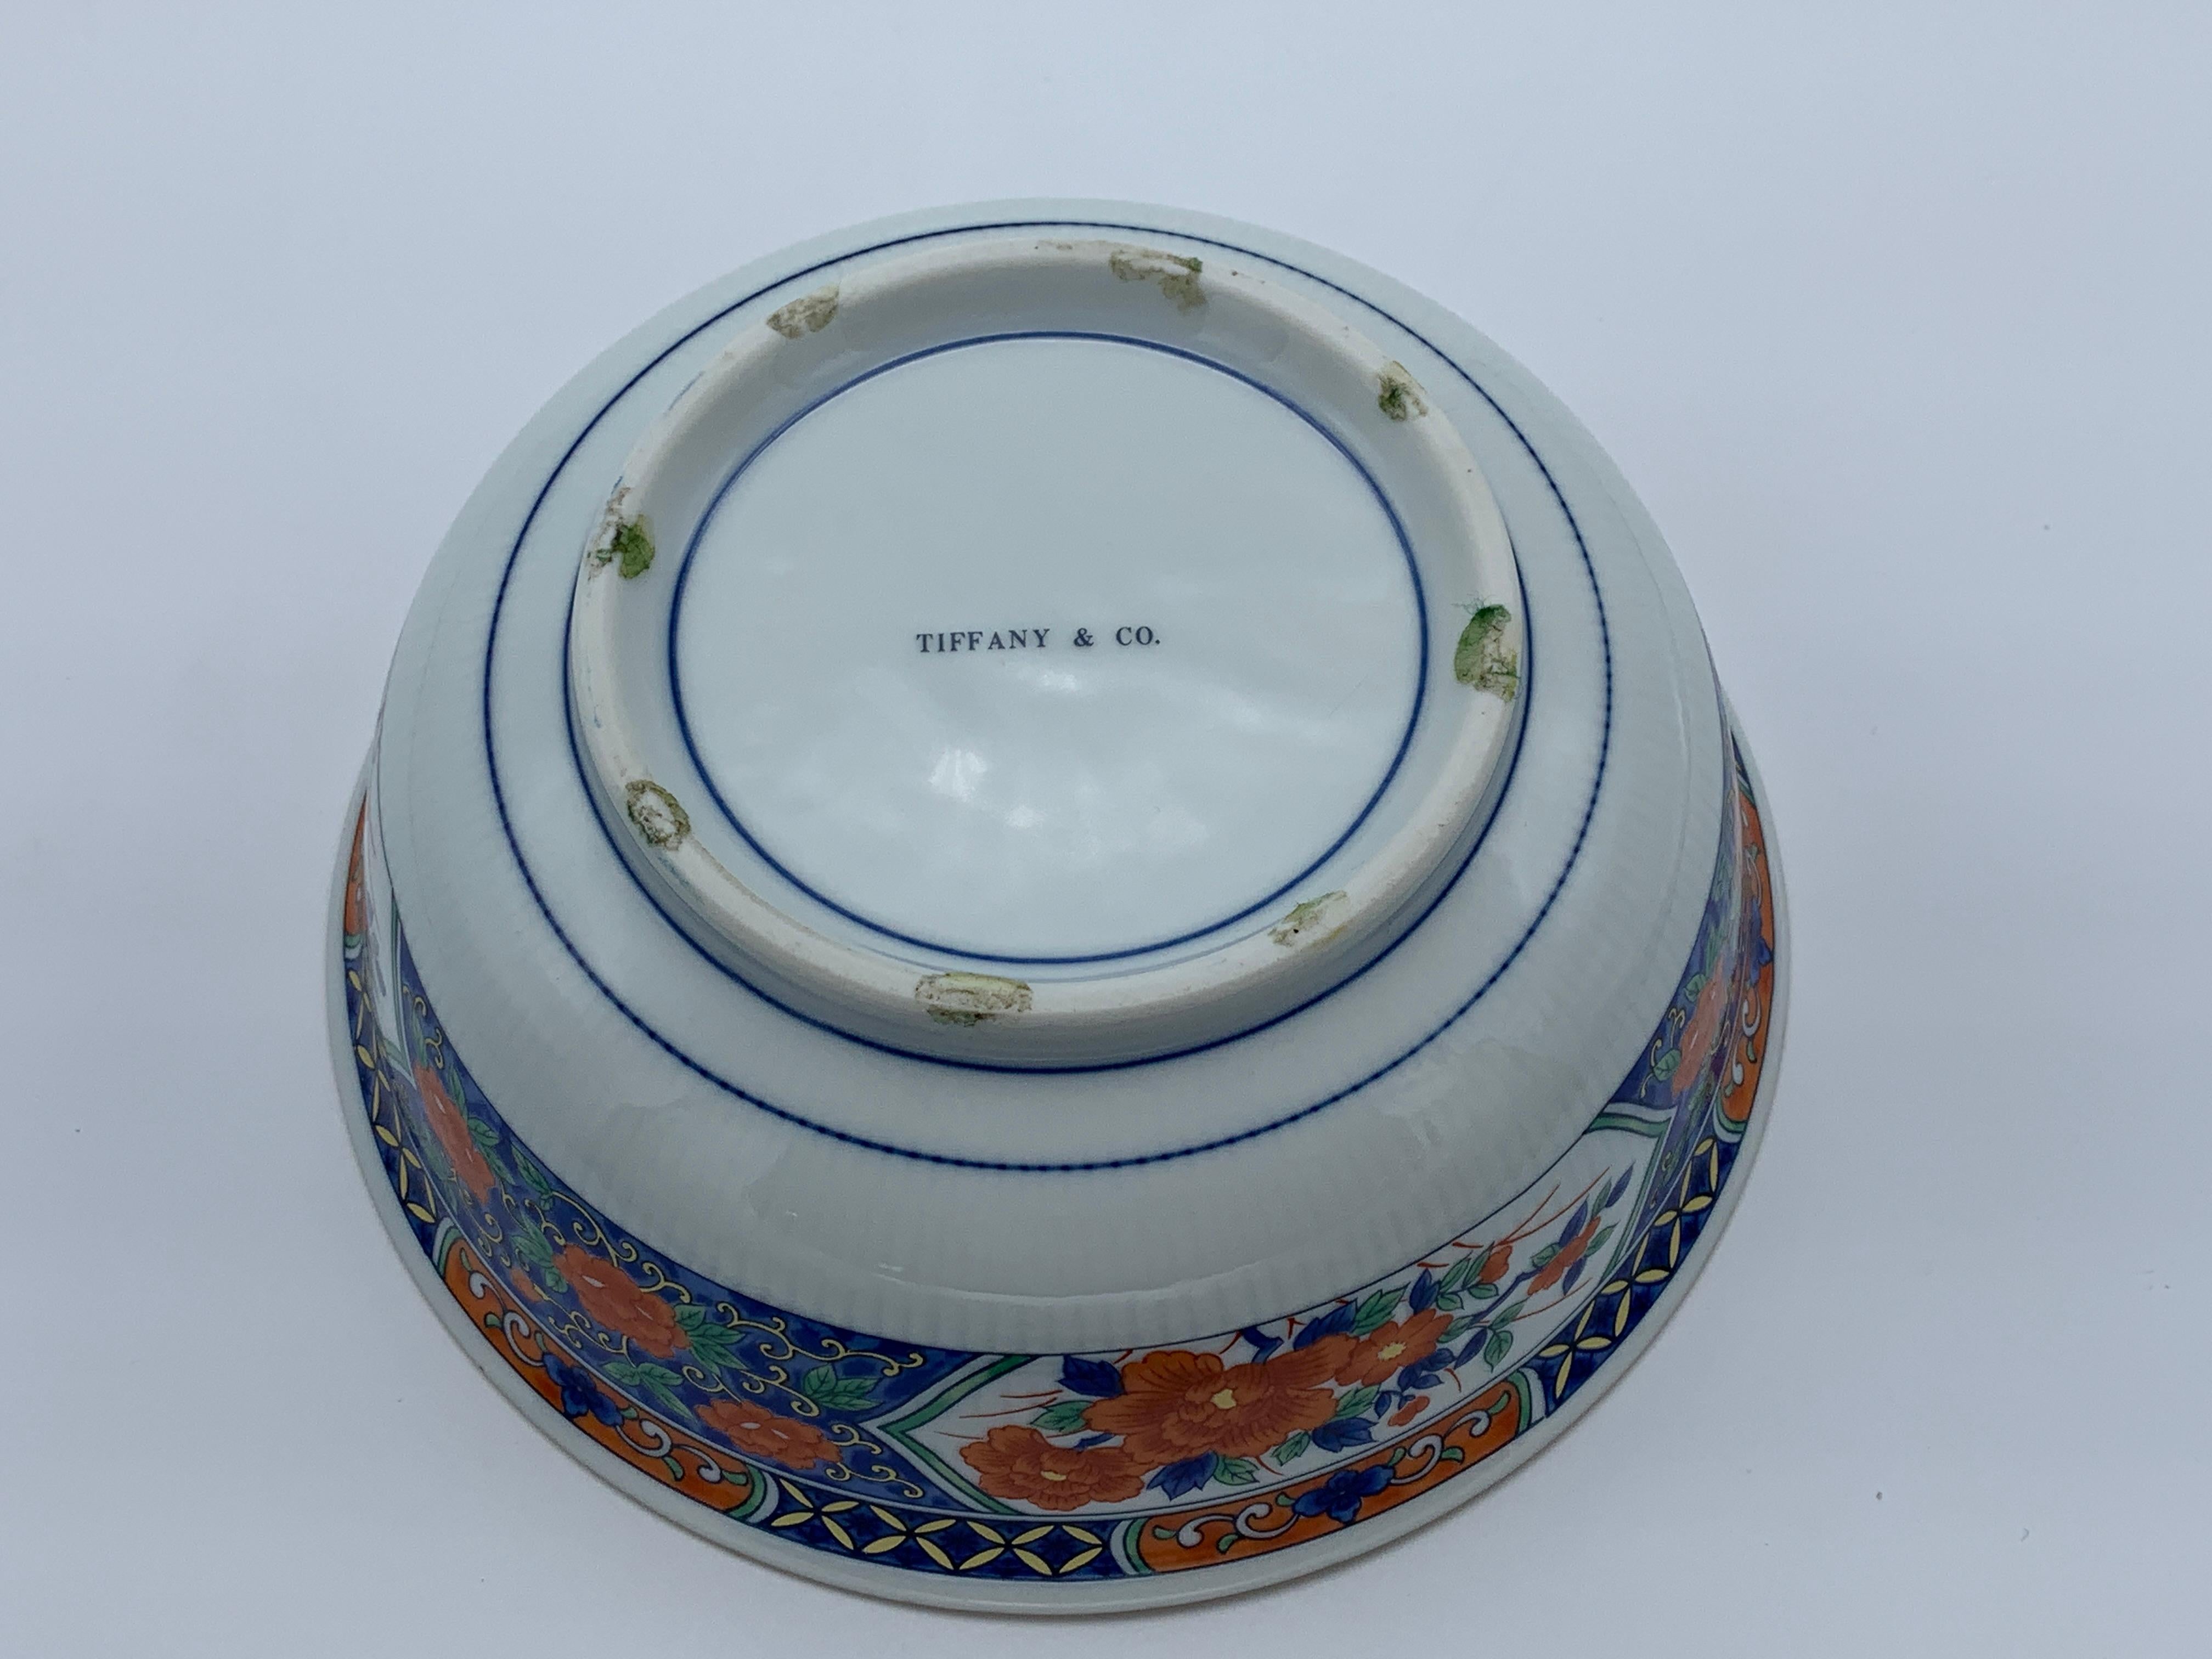 20th Century 1970s Tiffany & Co. Chinoiserie Blue and White Imari-Style Catchall Bowl